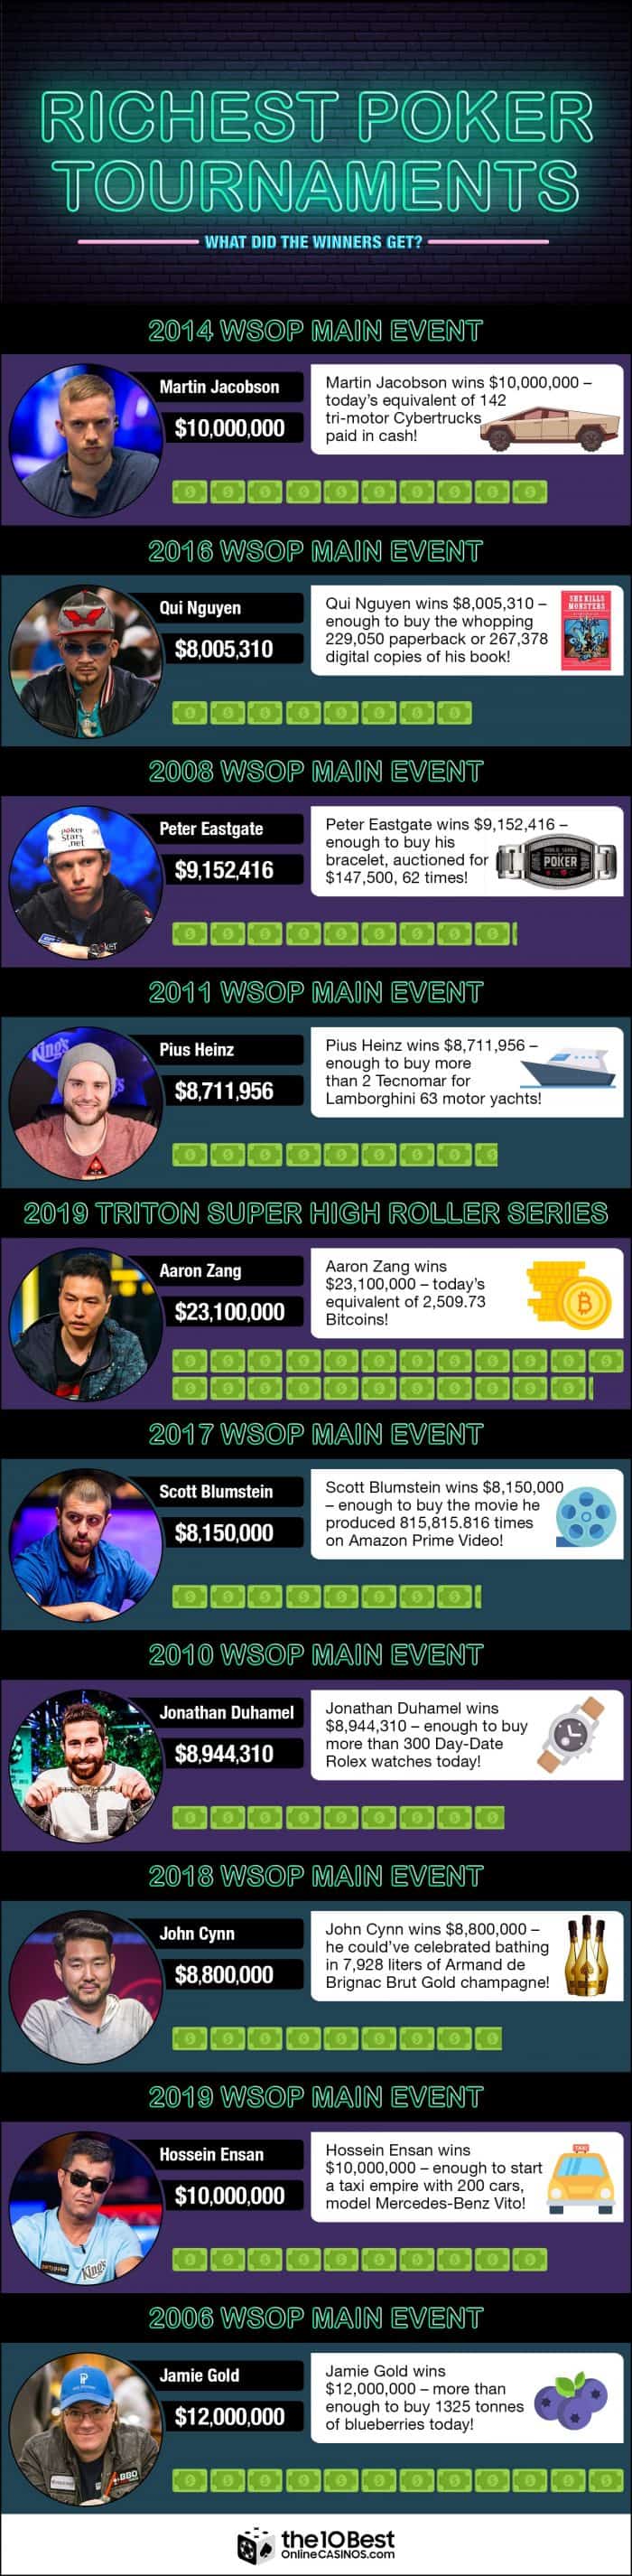 Top-10-Richest-Poker-Tournaments-and-Winners